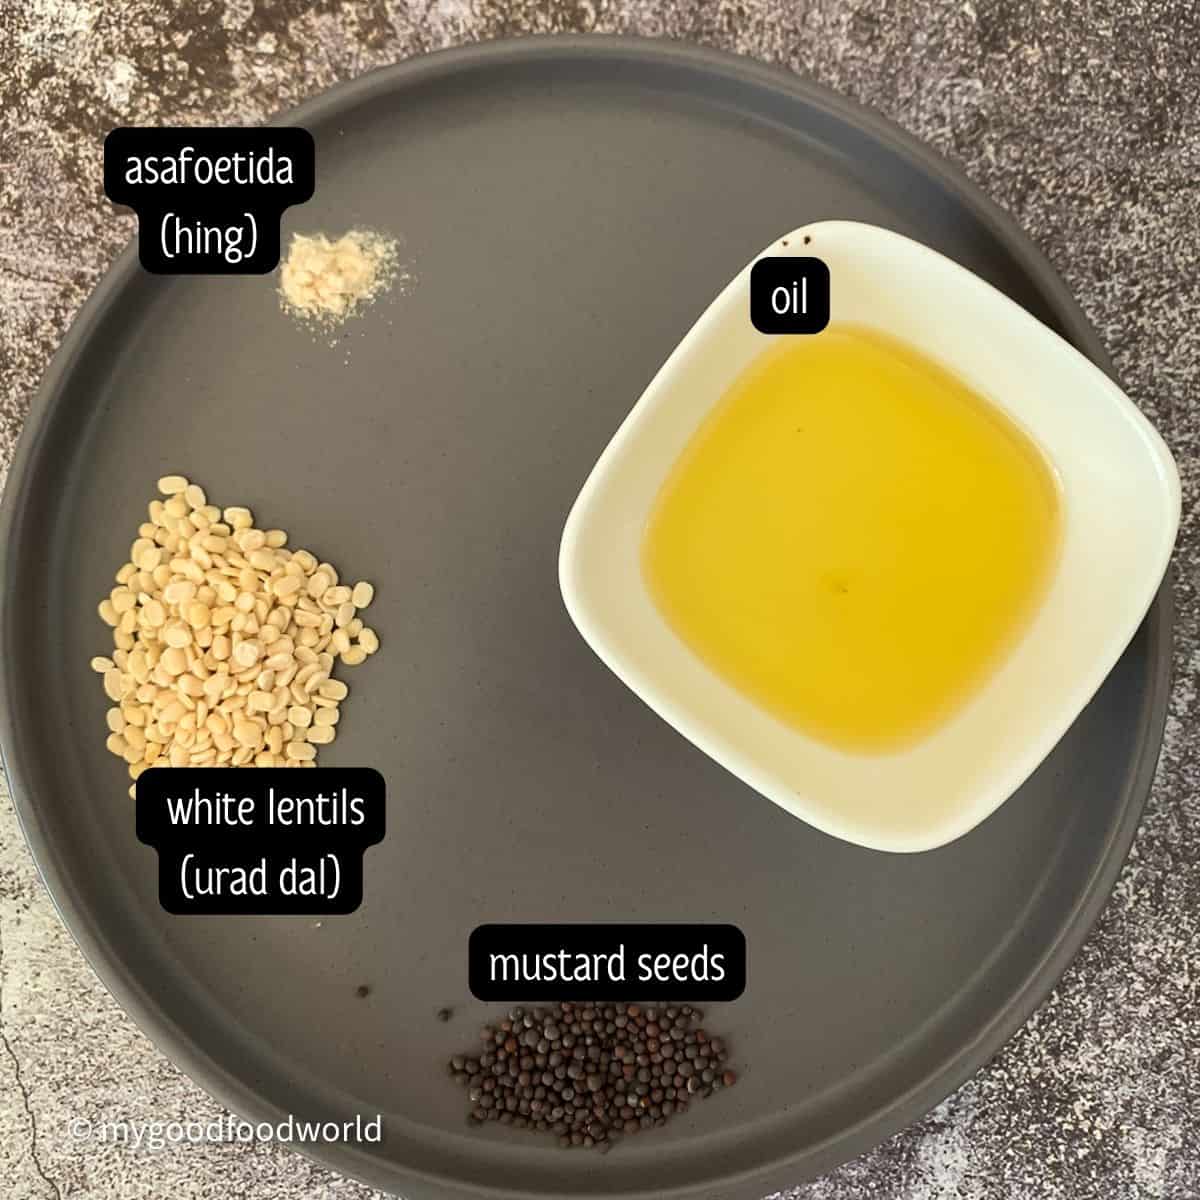 White lentils, mustard seeds, oil, and asafoetida powder are placed in a round grey plate.